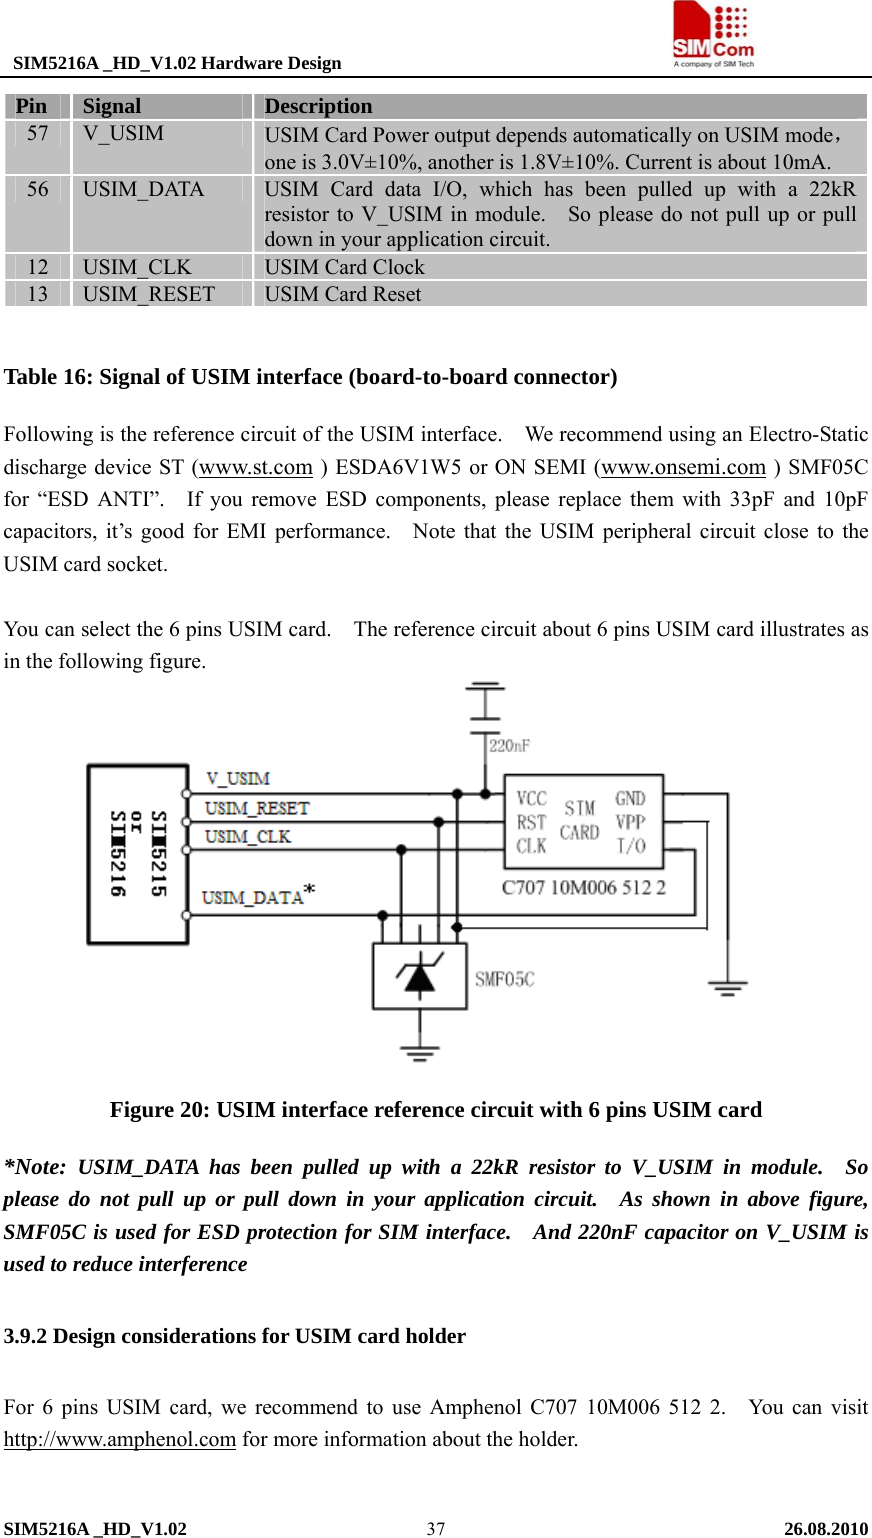  SIM5216A _HD_V1.02 Hardware Design                                     SIM5216A _HD_V1.02   26.08.2010   37Table 16: Signal of USIM interface (board-to-board connector) Following is the reference circuit of the USIM interface.    We recommend using an Electro-Static discharge device ST (www.st.com ) ESDA6V1W5 or ON SEMI (www.onsemi.com ) SMF05C for “ESD ANTI”.   If you remove ESD components, please replace them with 33pF and 10pF capacitors, it’s good for EMI performance.    Note that the USIM peripheral circuit close to the USIM card socket.  You can select the 6 pins USIM card.    The reference circuit about 6 pins USIM card illustrates as in the following figure.  Figure 20: USIM interface reference circuit with 6 pins USIM card *Note:  USIM_DATA has been pulled up with a 22kR resistor to V_USIM in module.  So please do not pull up or pull down in your application circuit.  As shown in above figure, SMF05C is used for ESD protection for SIM interface.    And 220nF capacitor on V_USIM is used to reduce interference 3.9.2 Design considerations for USIM card holder   For 6 pins USIM card, we recommend to use Amphenol C707 10M006 512 2.   You can visit http://www.amphenol.com for more information about the holder.  Pin  Signal  Description 57  V_USIM  USIM Card Power output depends automatically on USIM mode，one is 3.0V±10%, another is 1.8V±10%. Current is about 10mA. 56  USIM_DATA  USIM Card data I/O, which has been pulled up with a 22kR resistor to V_USIM in module.    So please do not pull up or pull down in your application circuit. 12  USIM_CLK  USIM Card Clock 13  USIM_RESET  USIM Card Reset 